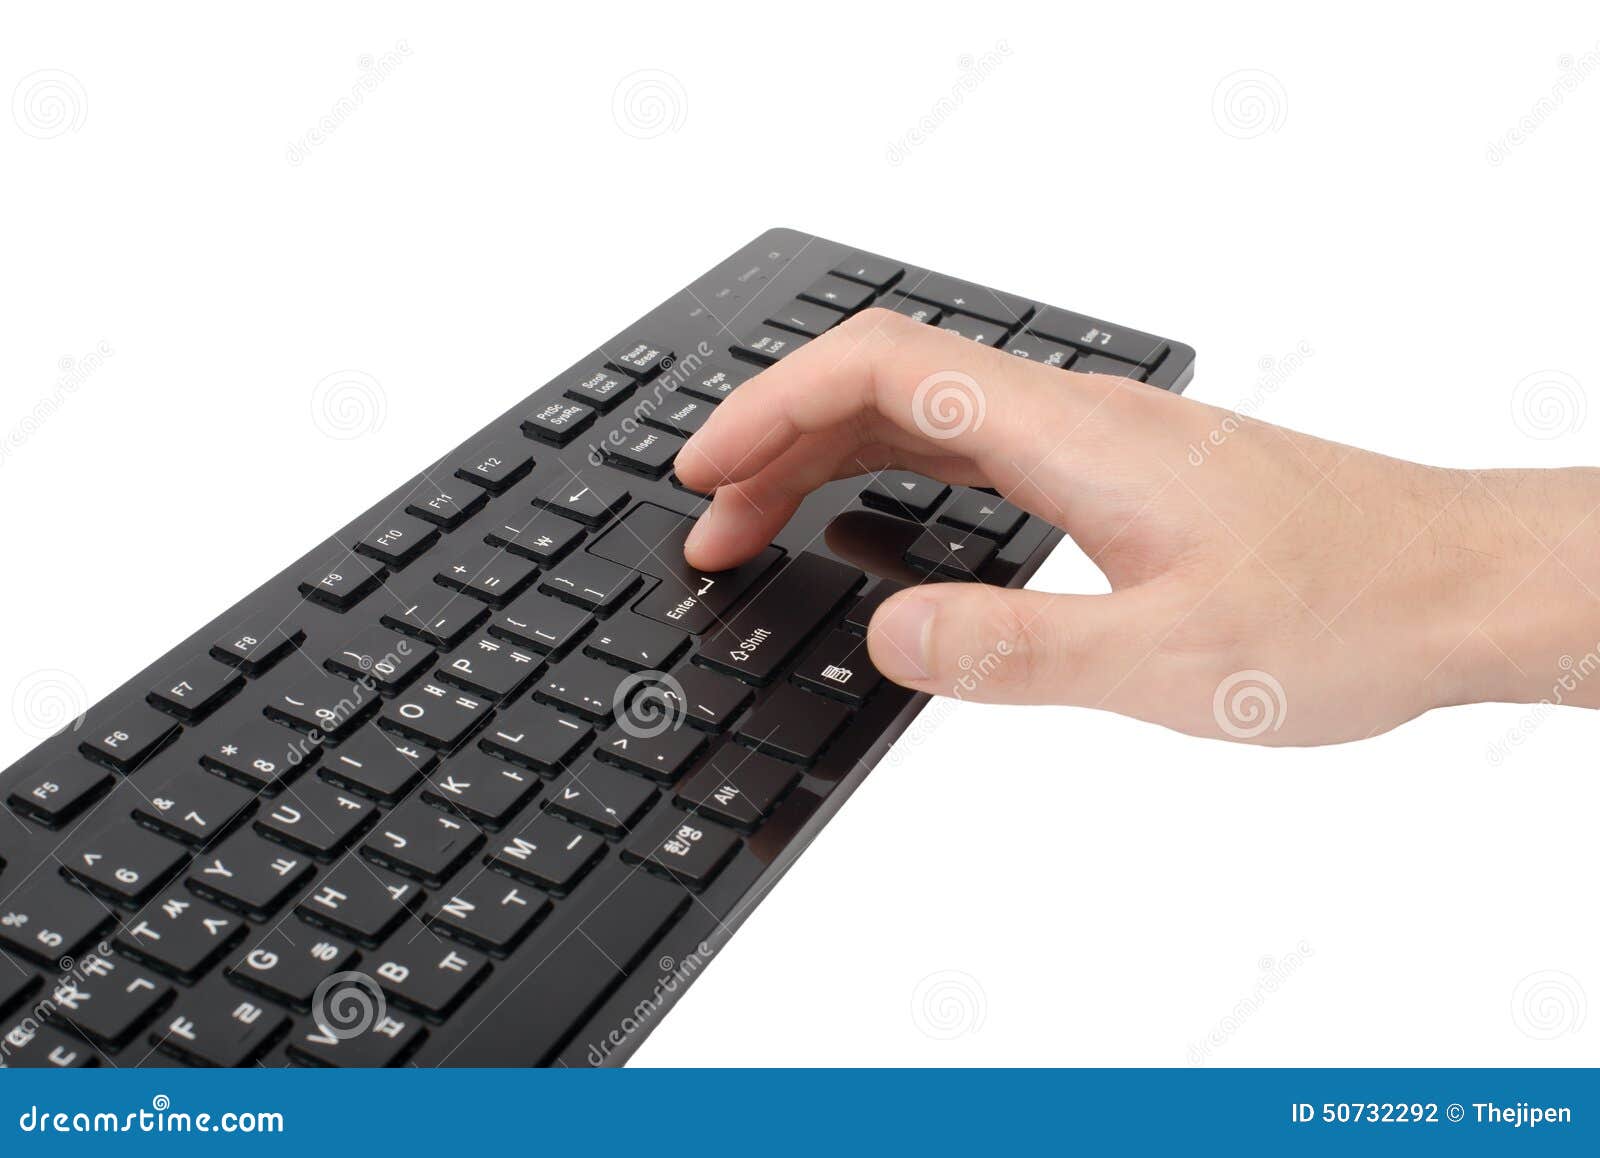 Direct current and press enter key